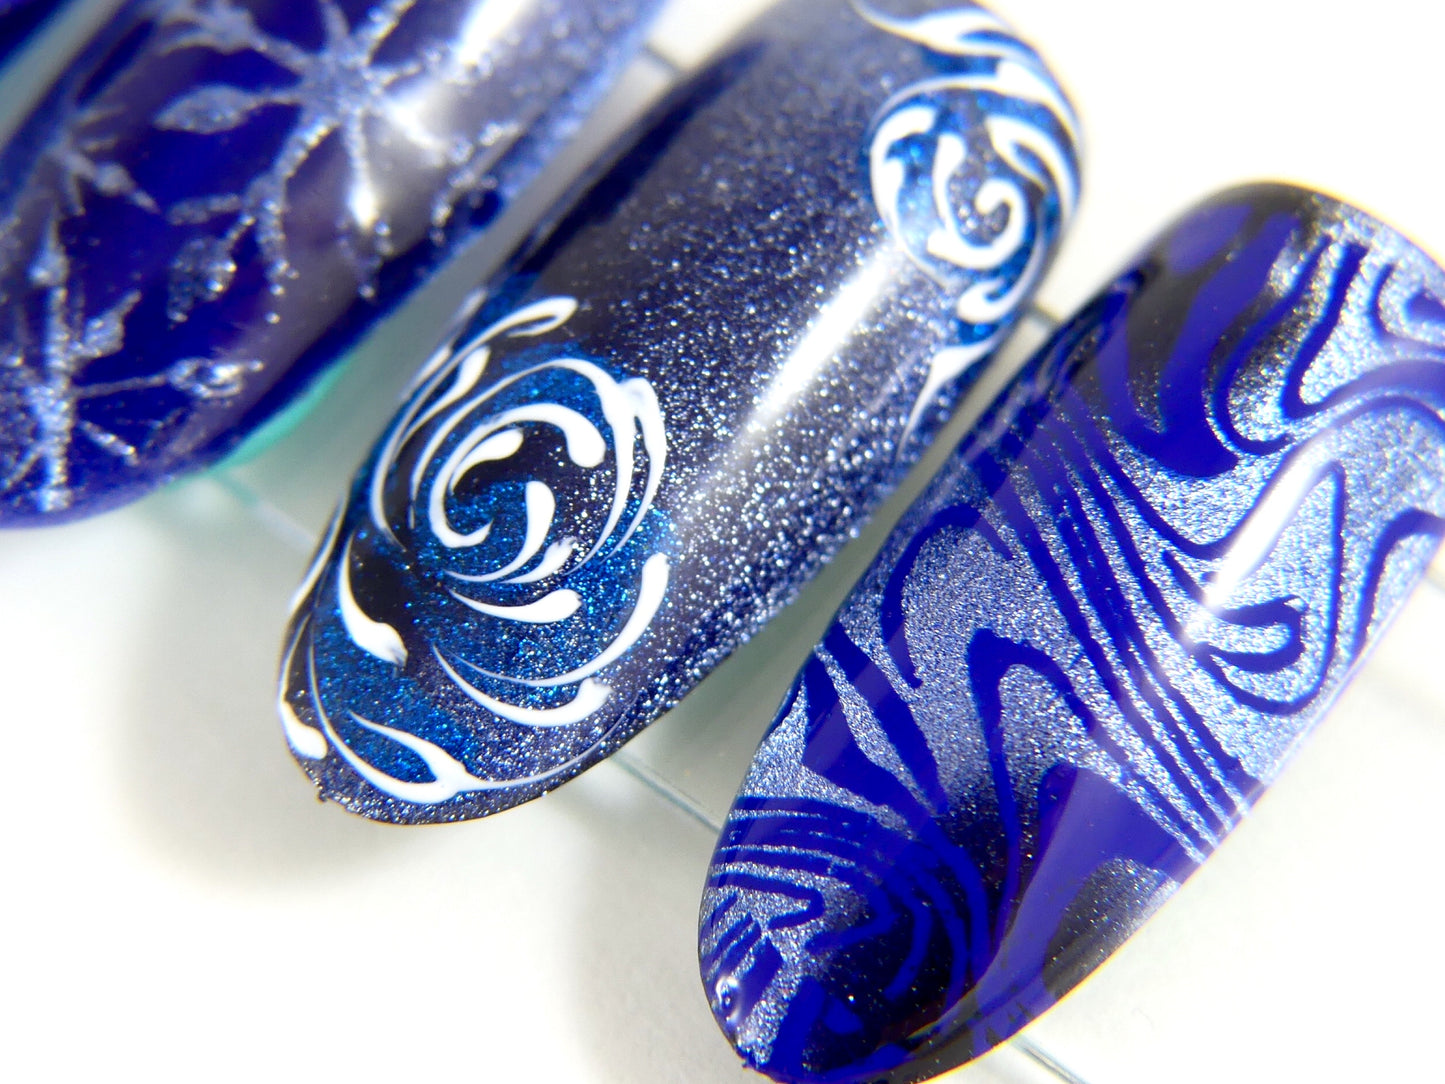 Load image into Gallery viewer, Cat Eye Gel Polish - Midnight Blue - My Little Nail Art Shop
